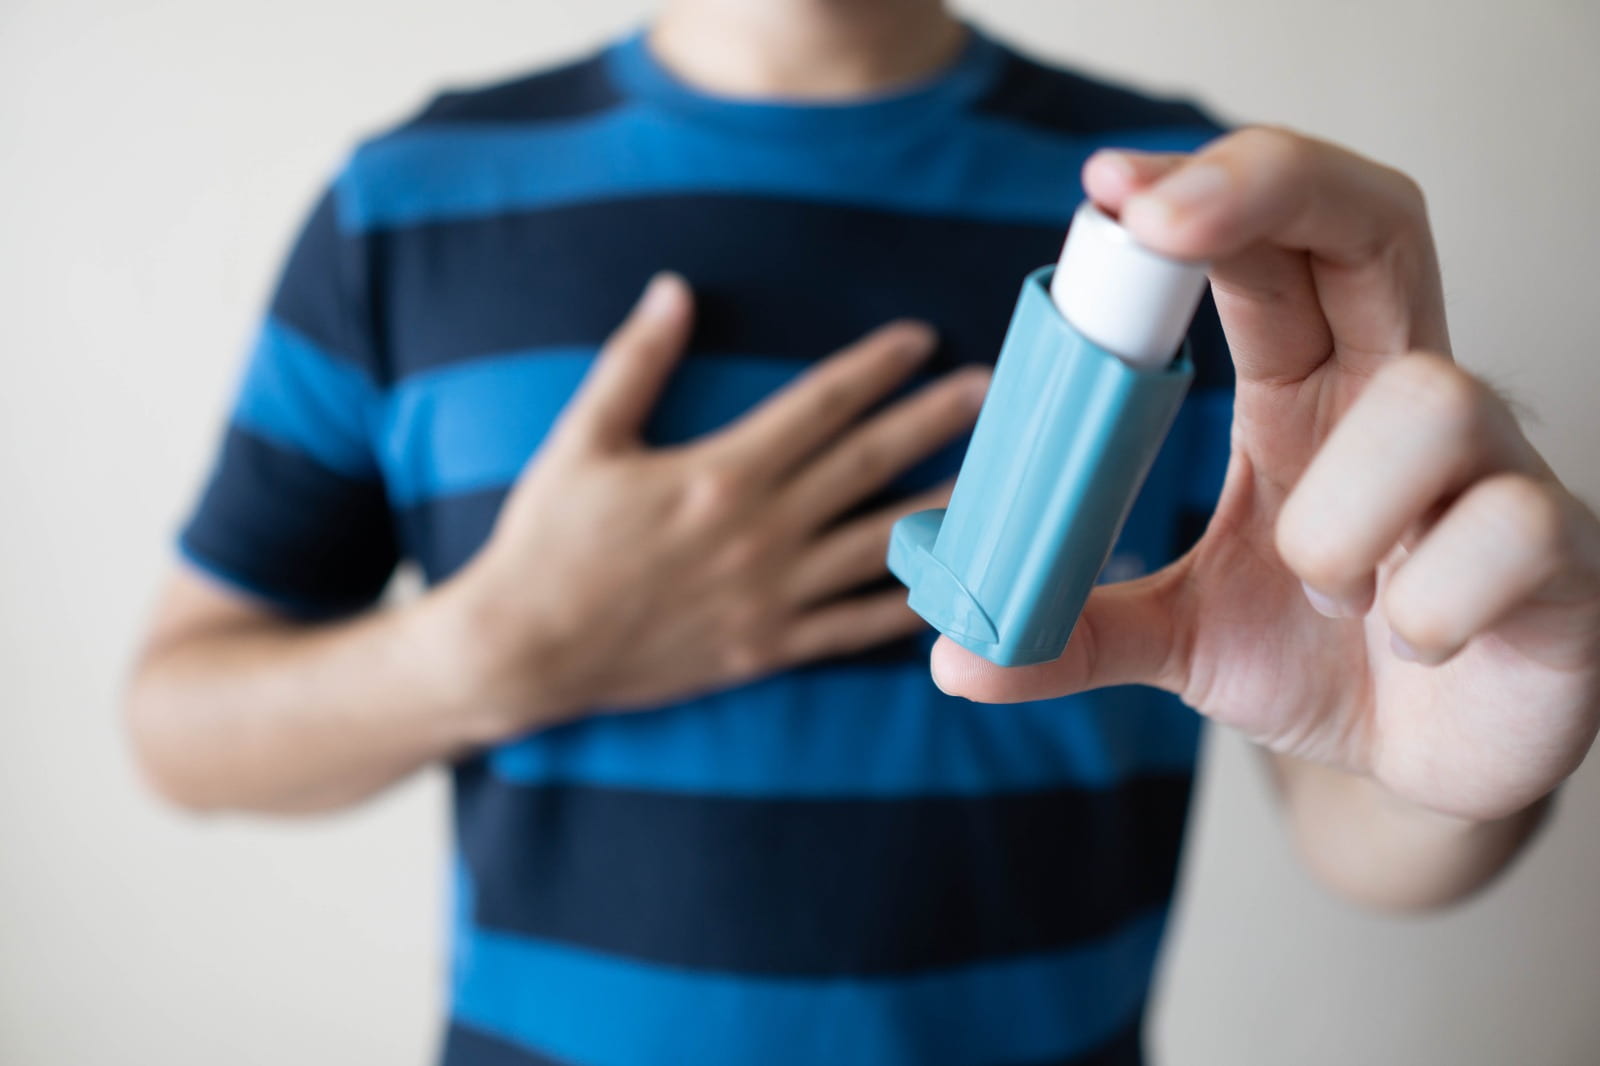 Ventolin alongside home remedies for managing asthma